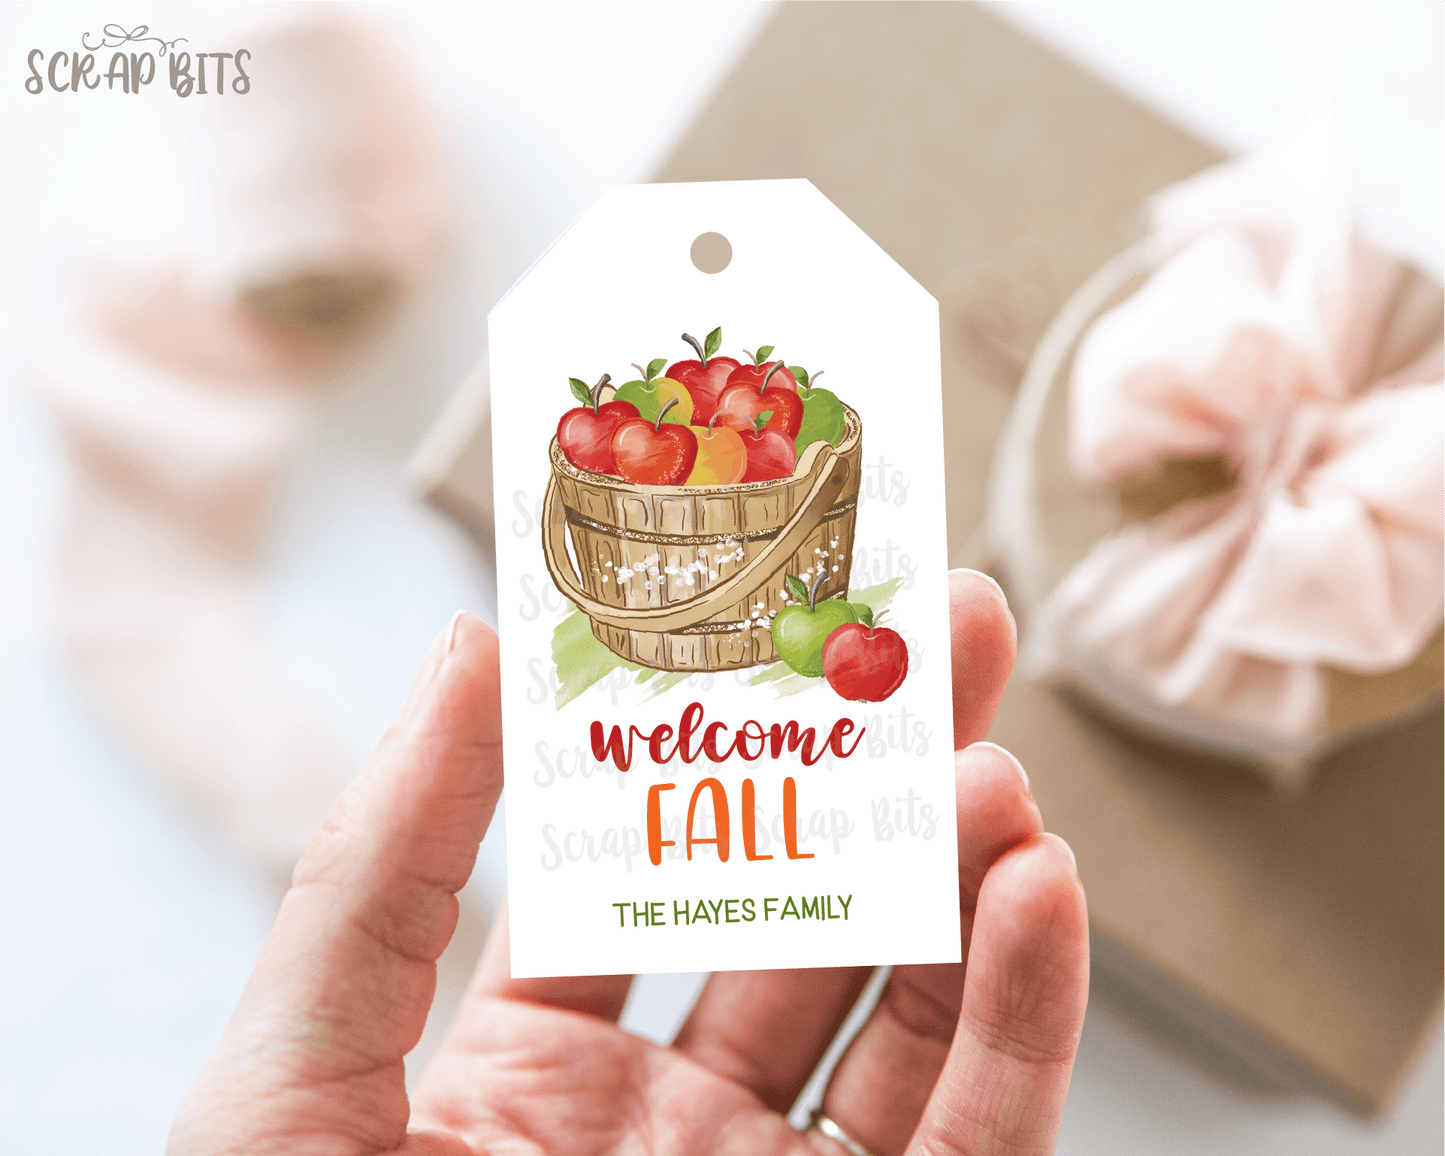 Welcome Fall Tags, Basket of Apples . Fall Treat Bag Tags - Scrap Bits